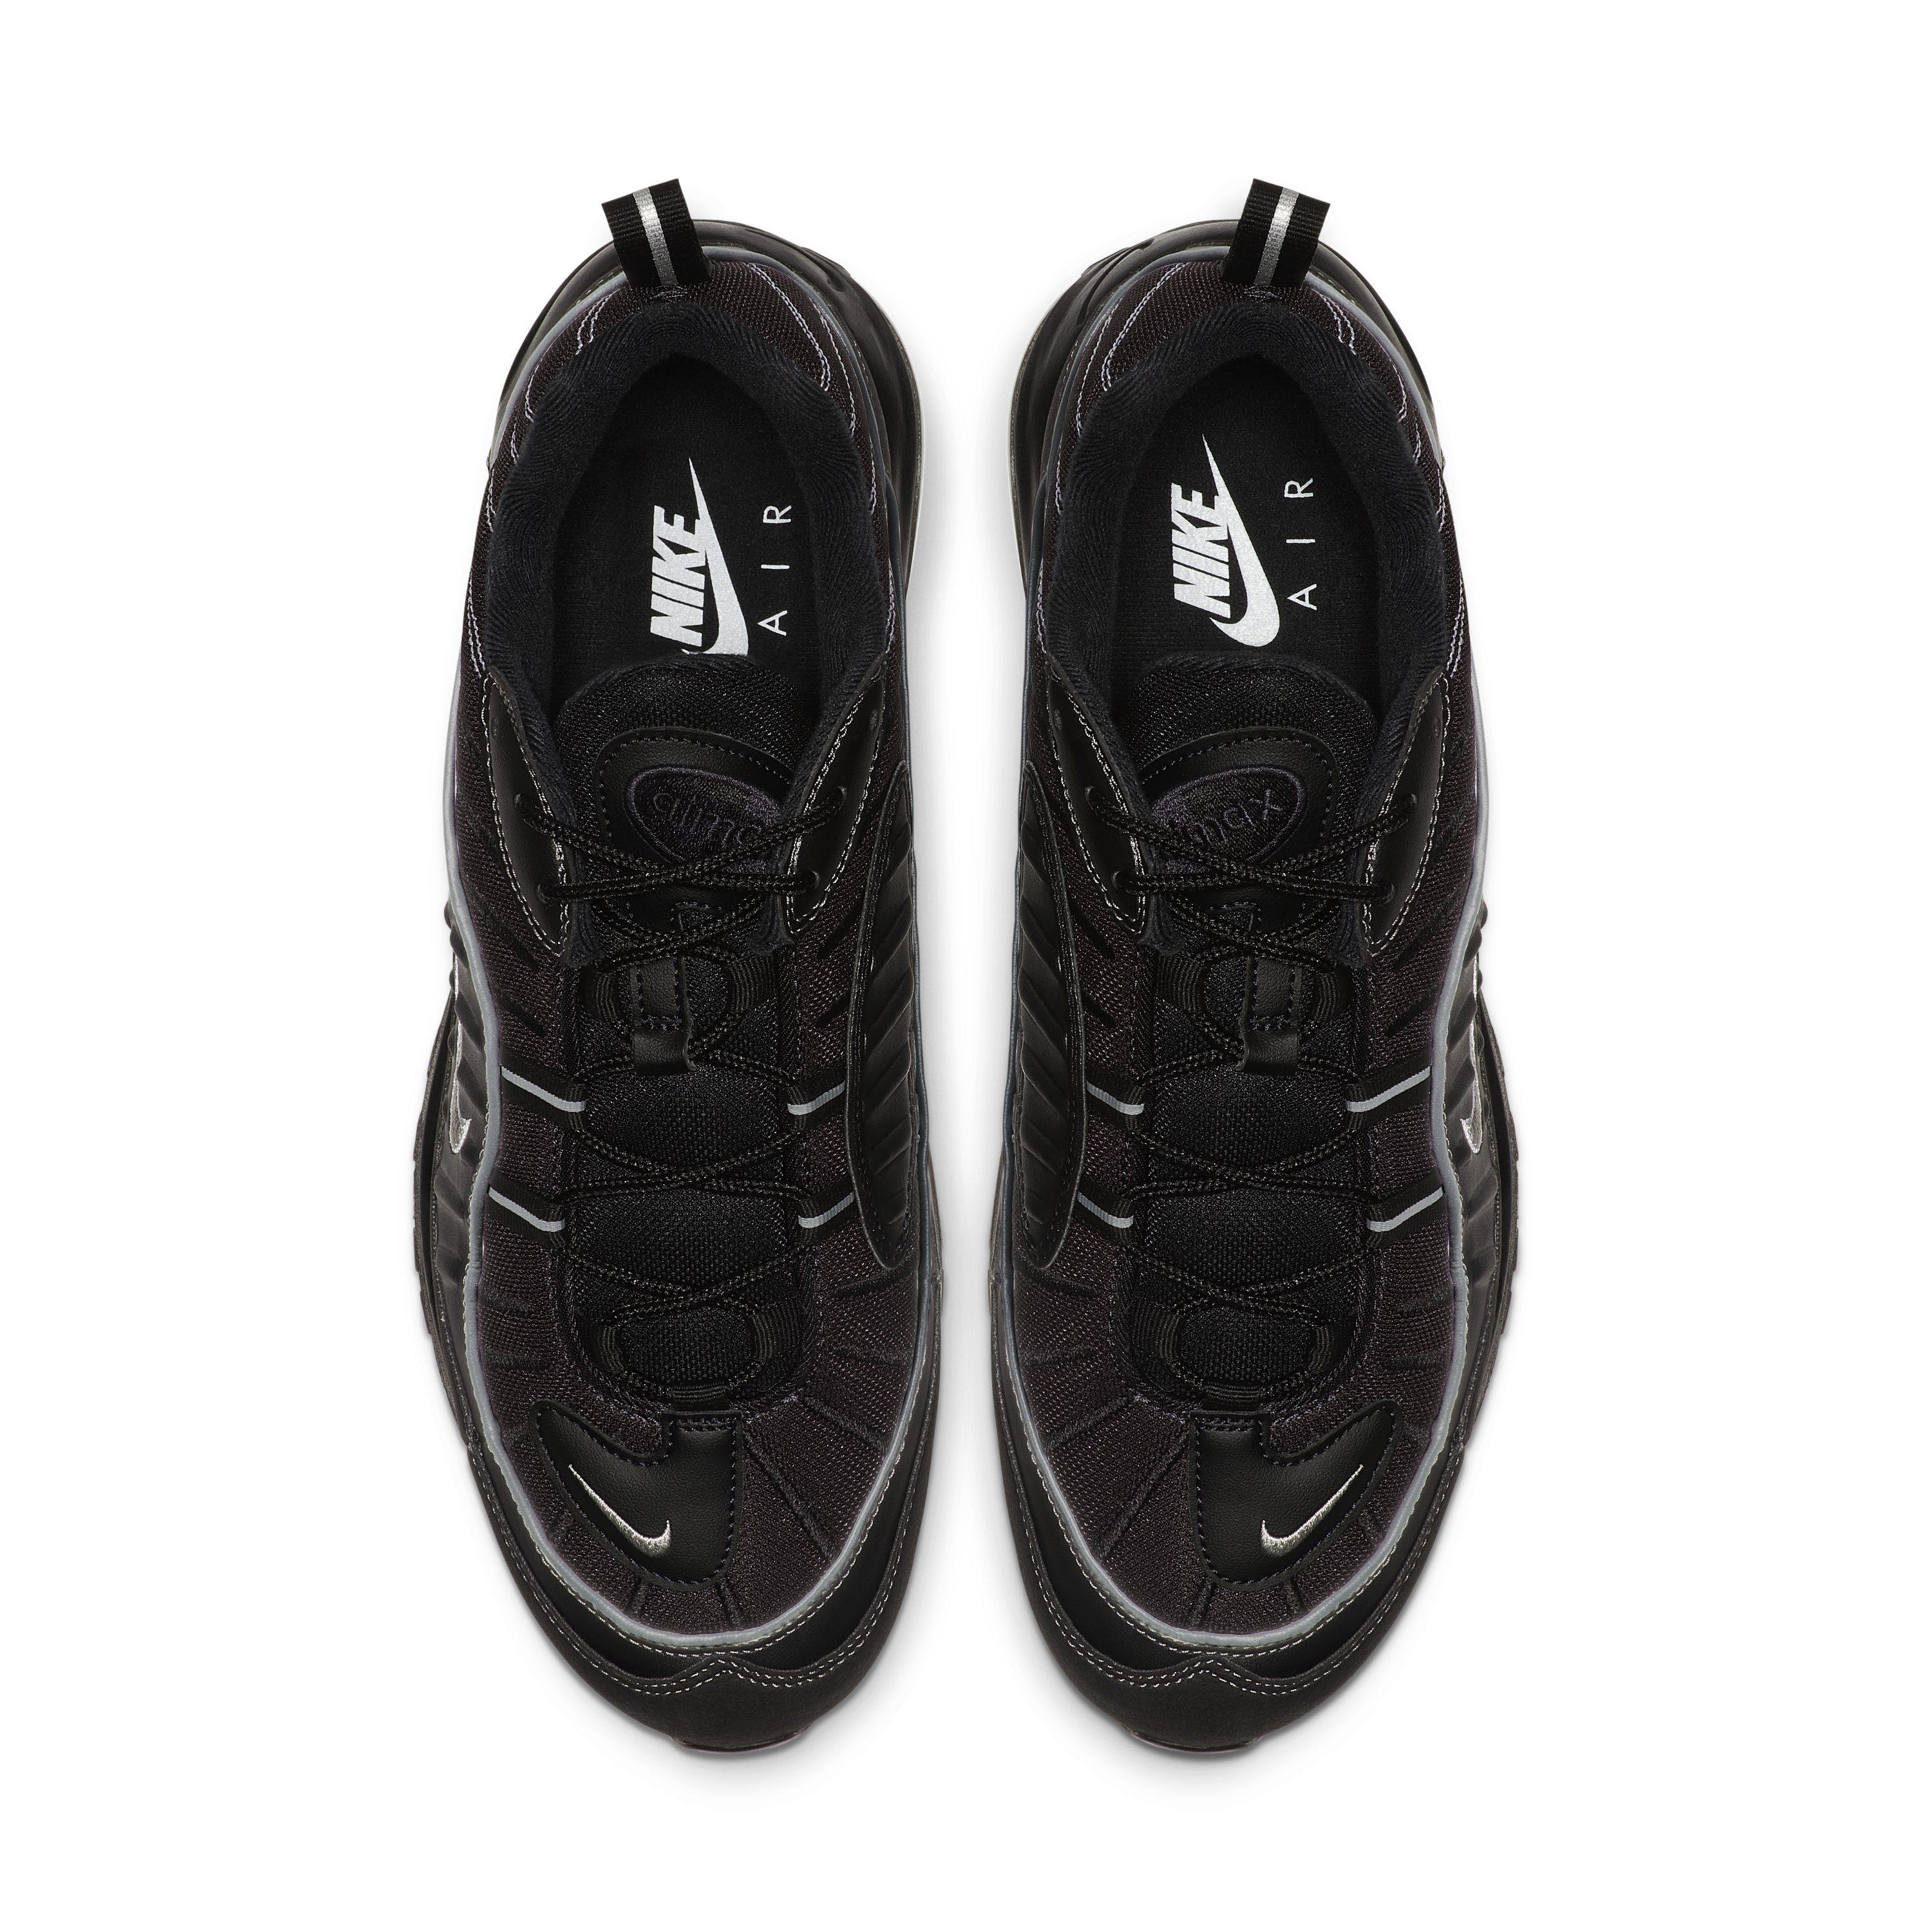 Nike Leather Air Max 98 Shoe in Black for Men - Lyst